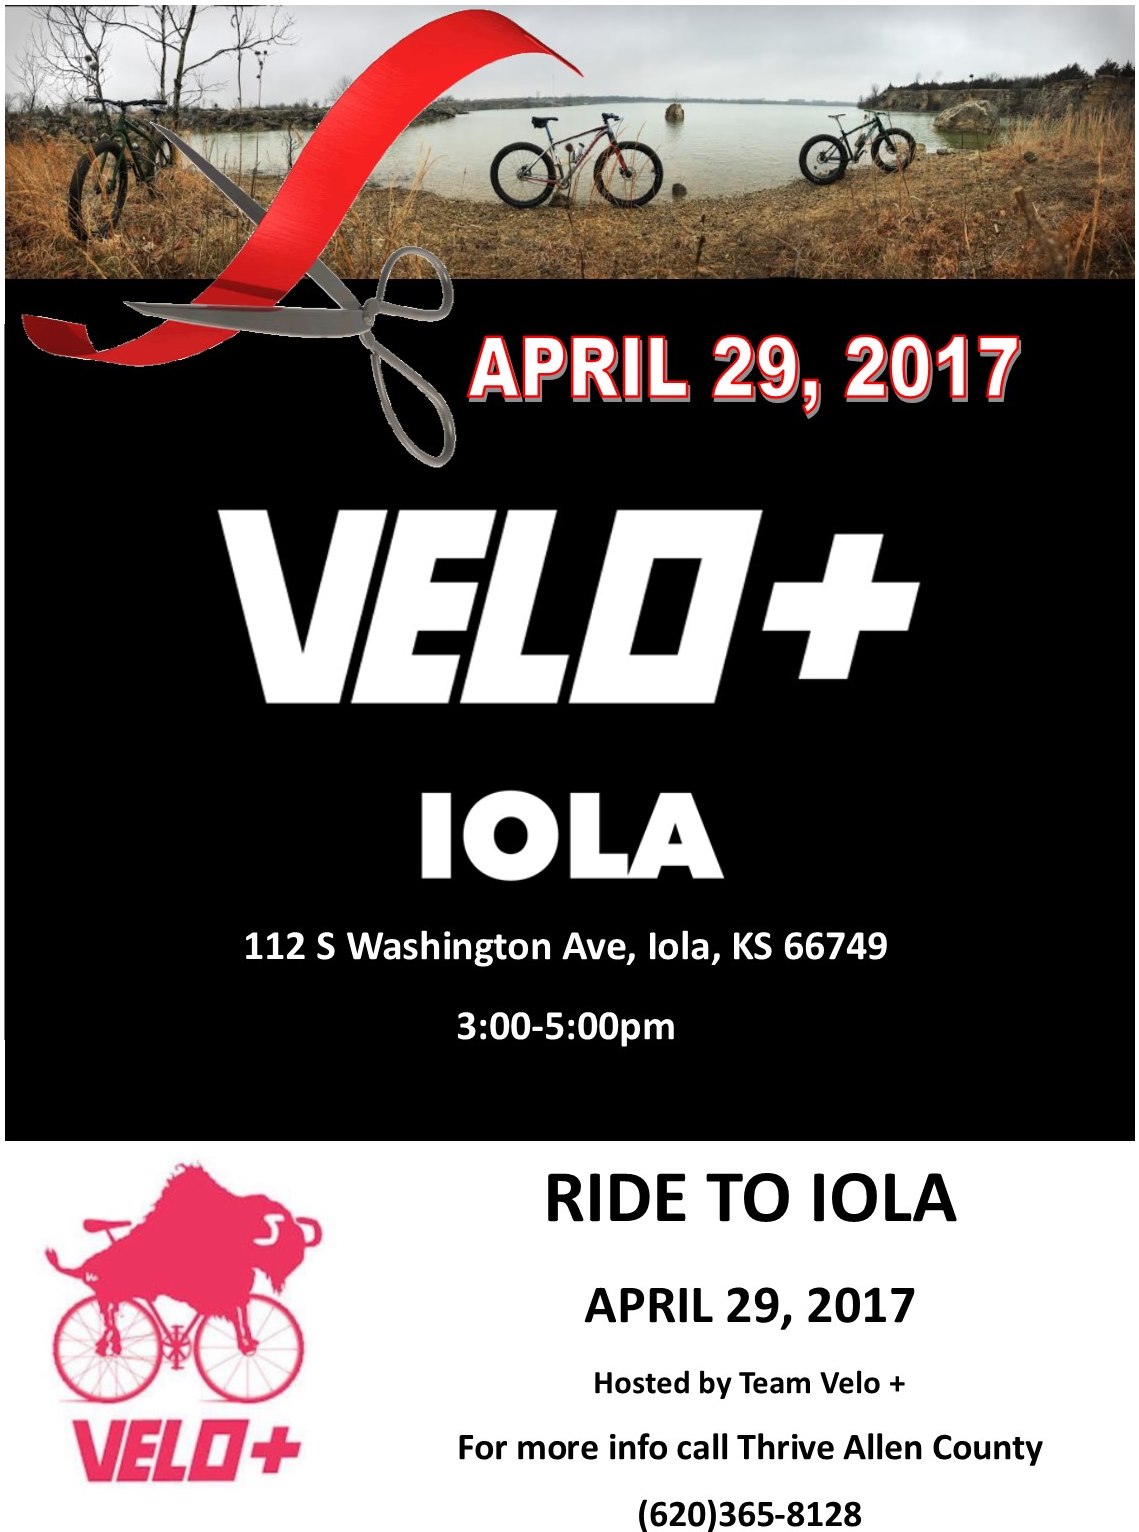 Velo+ Bike Store Grand Opening on April 29th